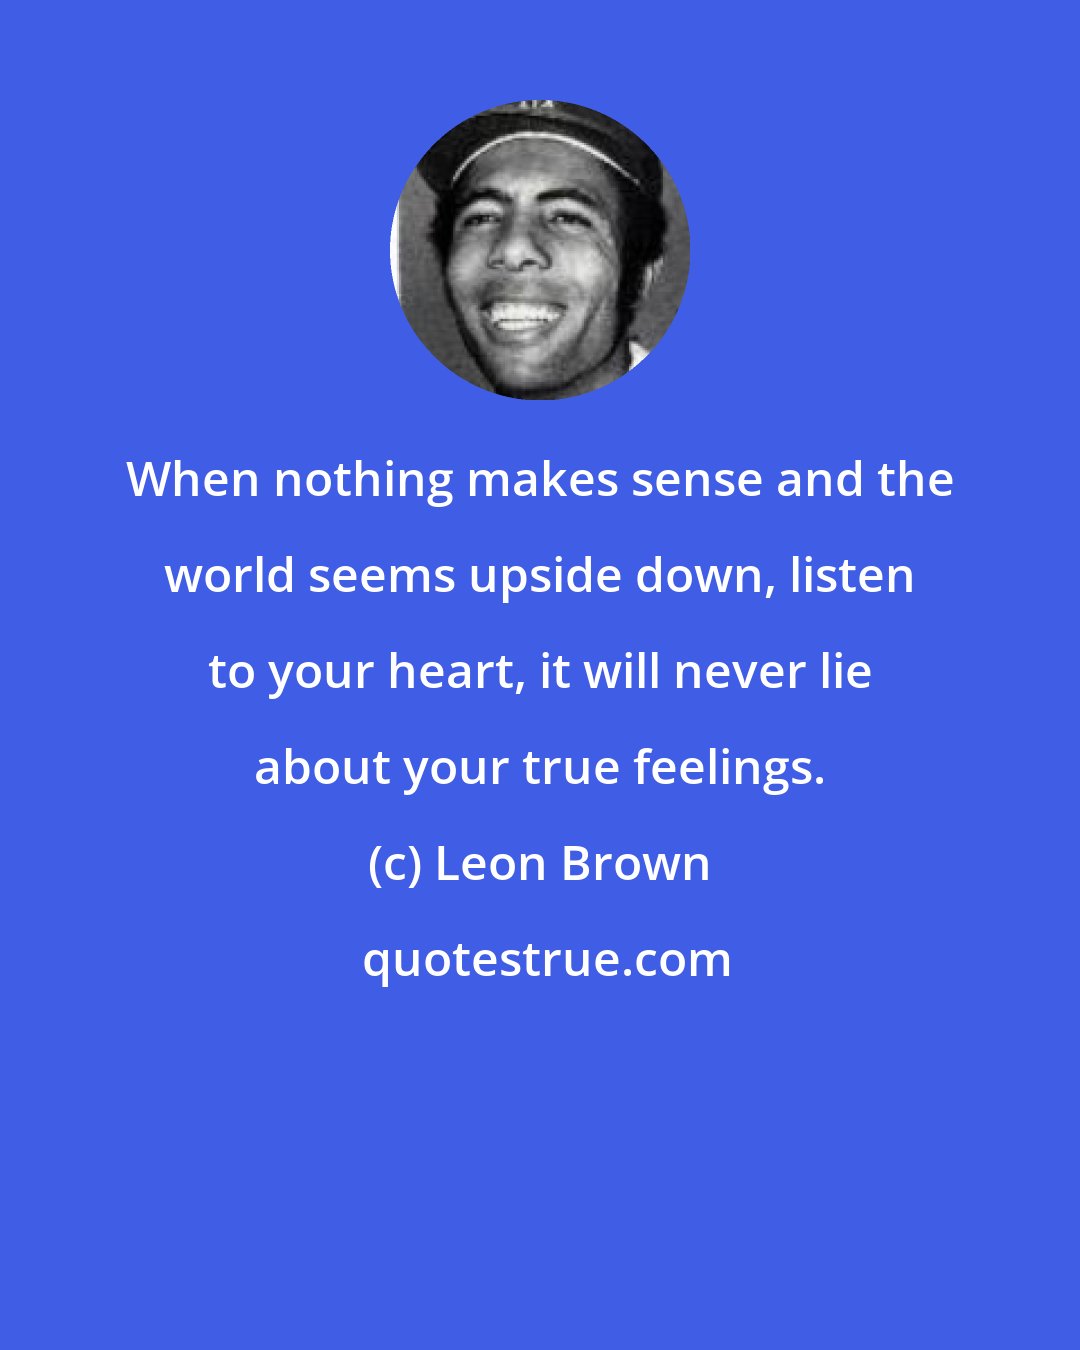 Leon Brown: When nothing makes sense and the world seems upside down, listen to your heart, it will never lie about your true feelings.